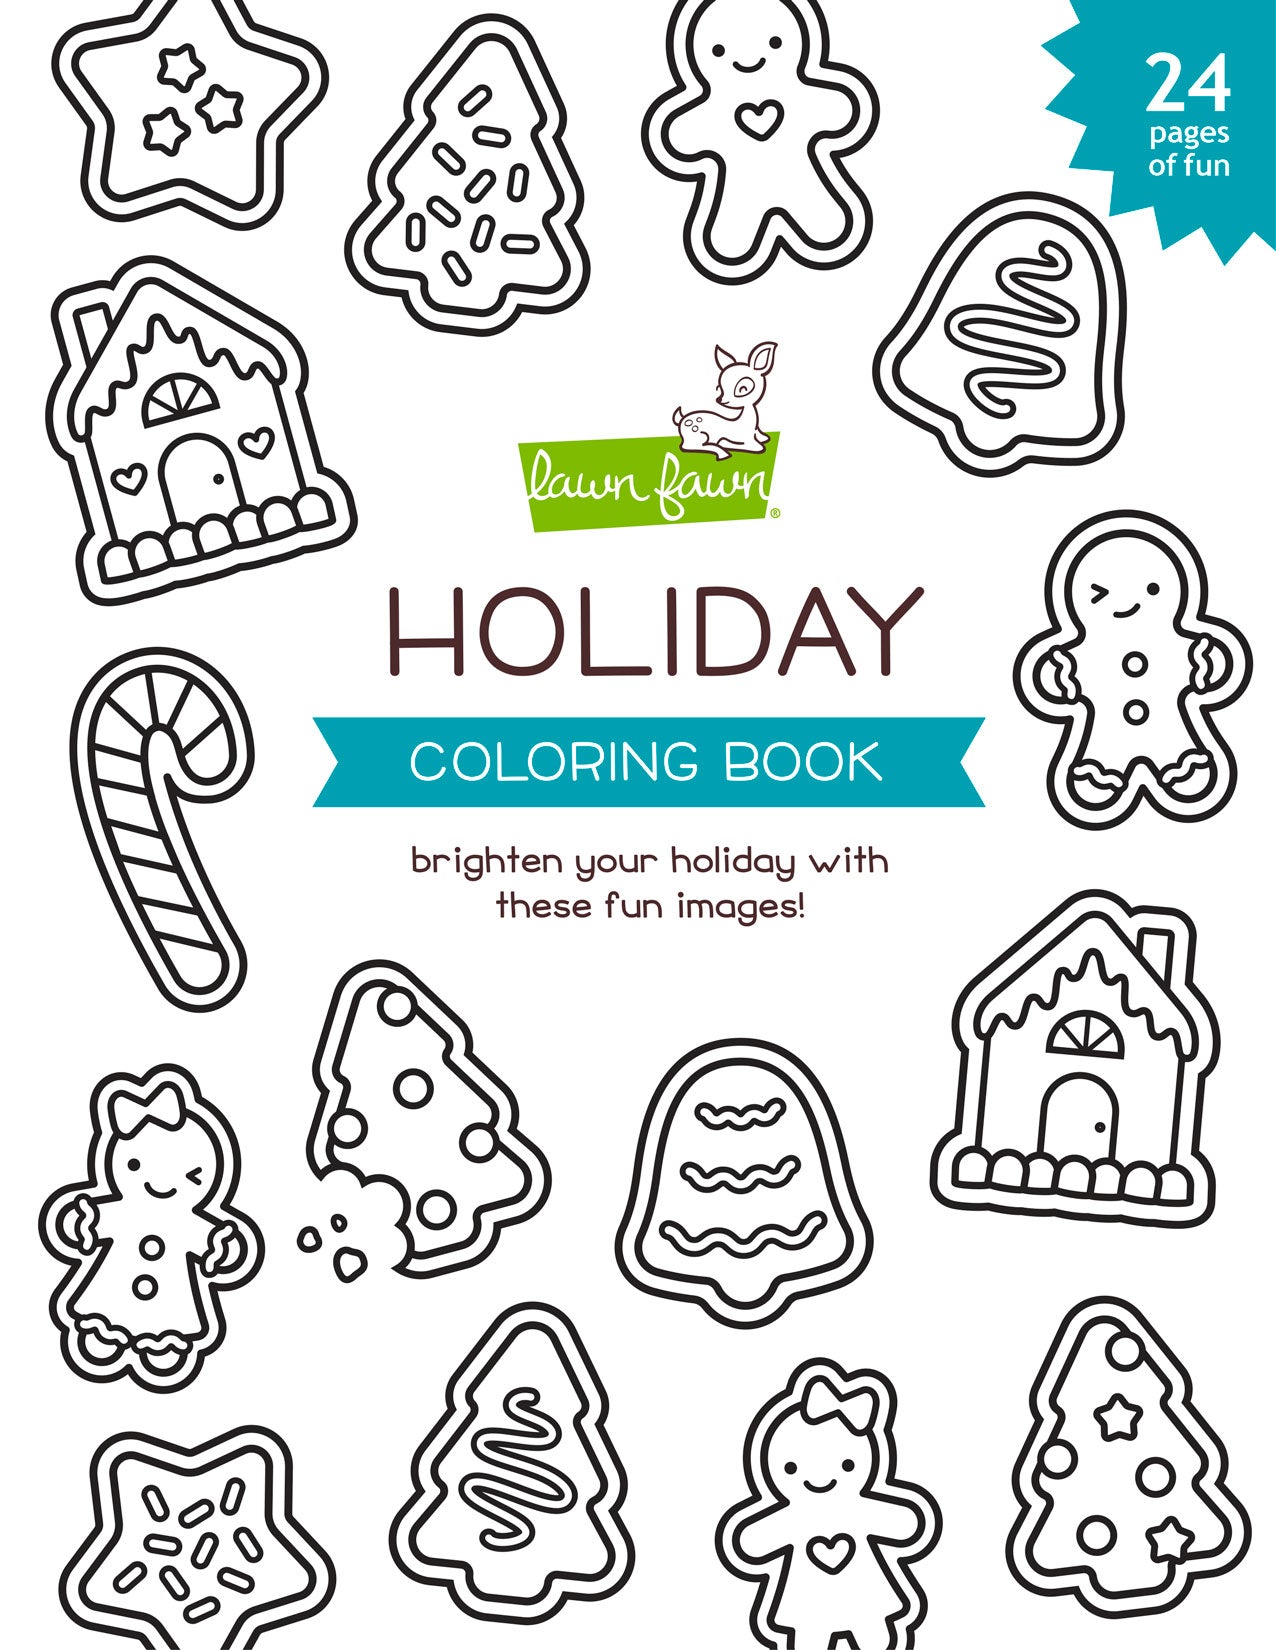 I. Introduction to Holiday-Themed Coloring Books